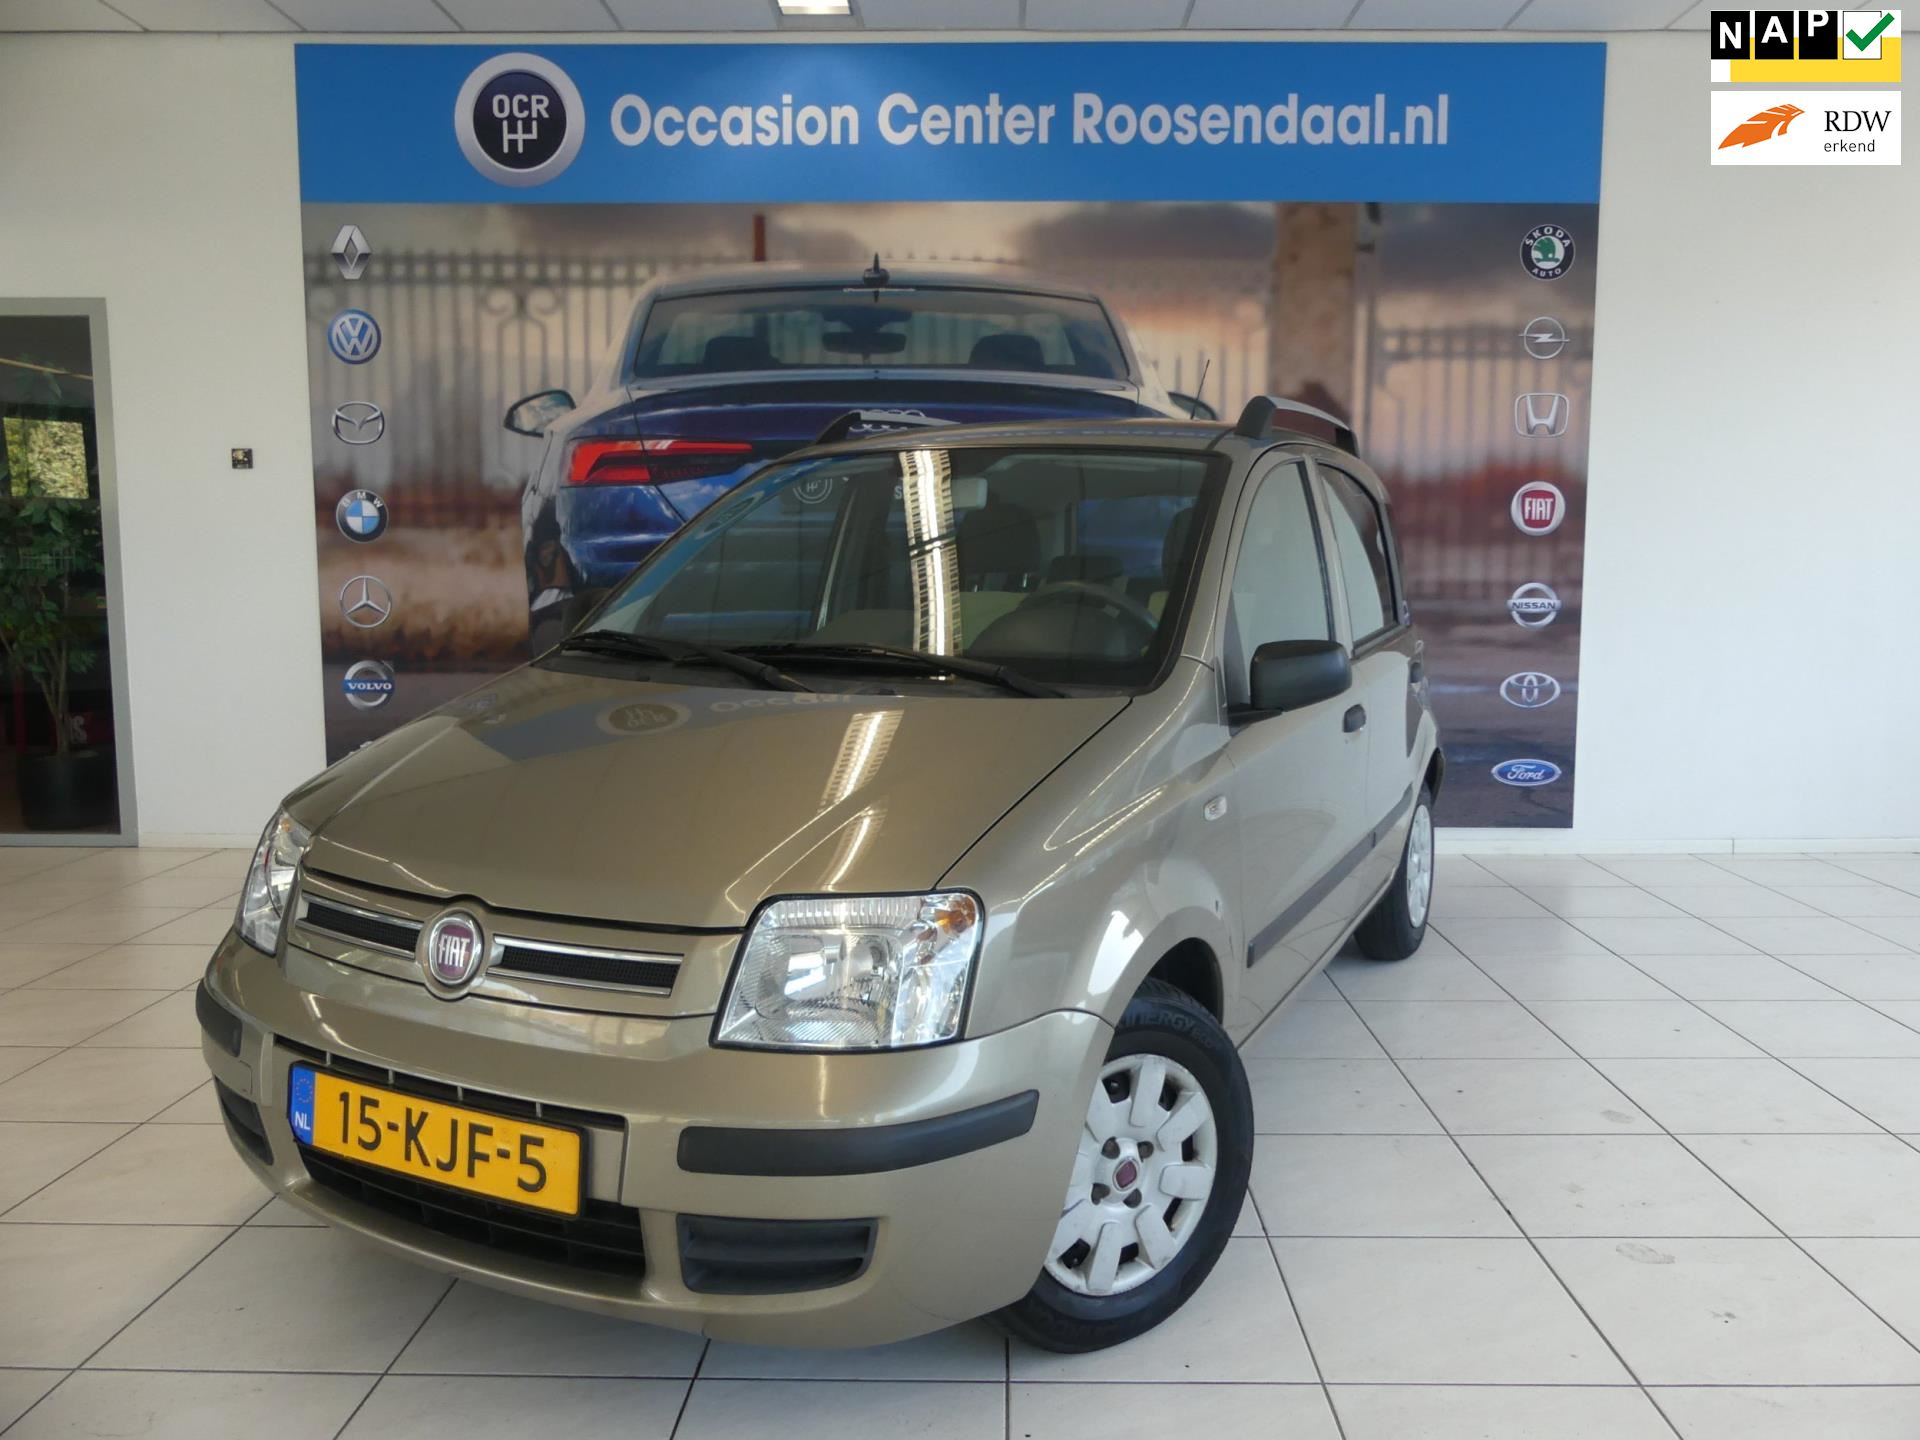 Fiat Panda occasion - Occasion Center Roosendaal